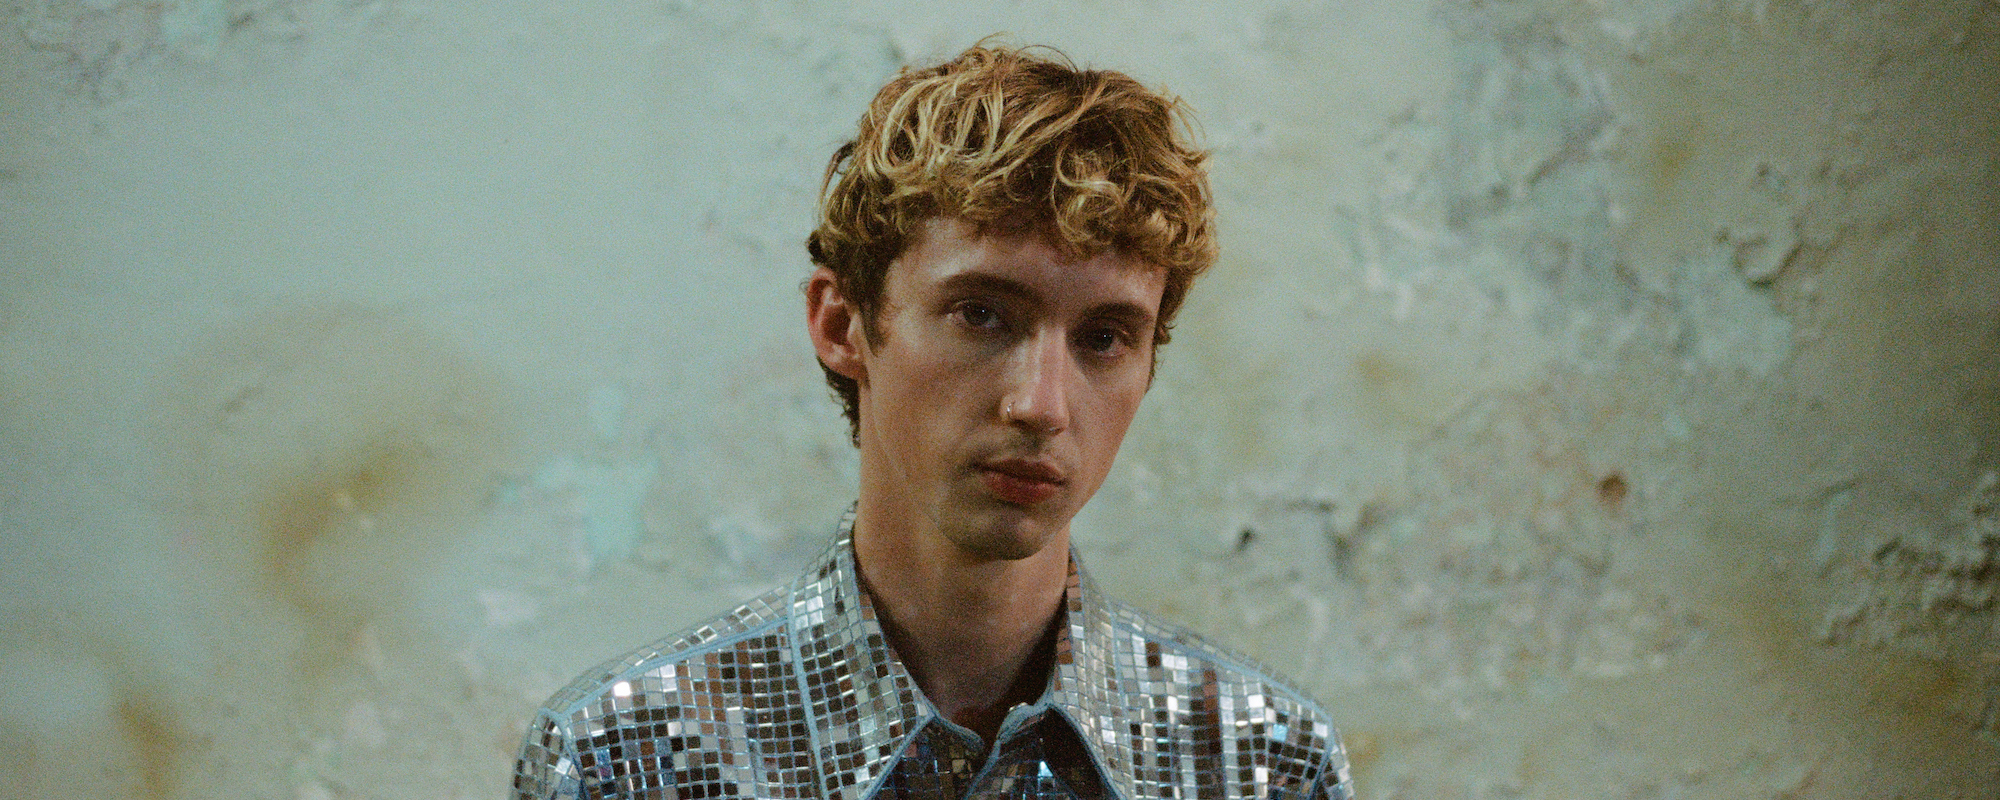 Troye Sivan transforms into full drag in 'One of Your Girls' video